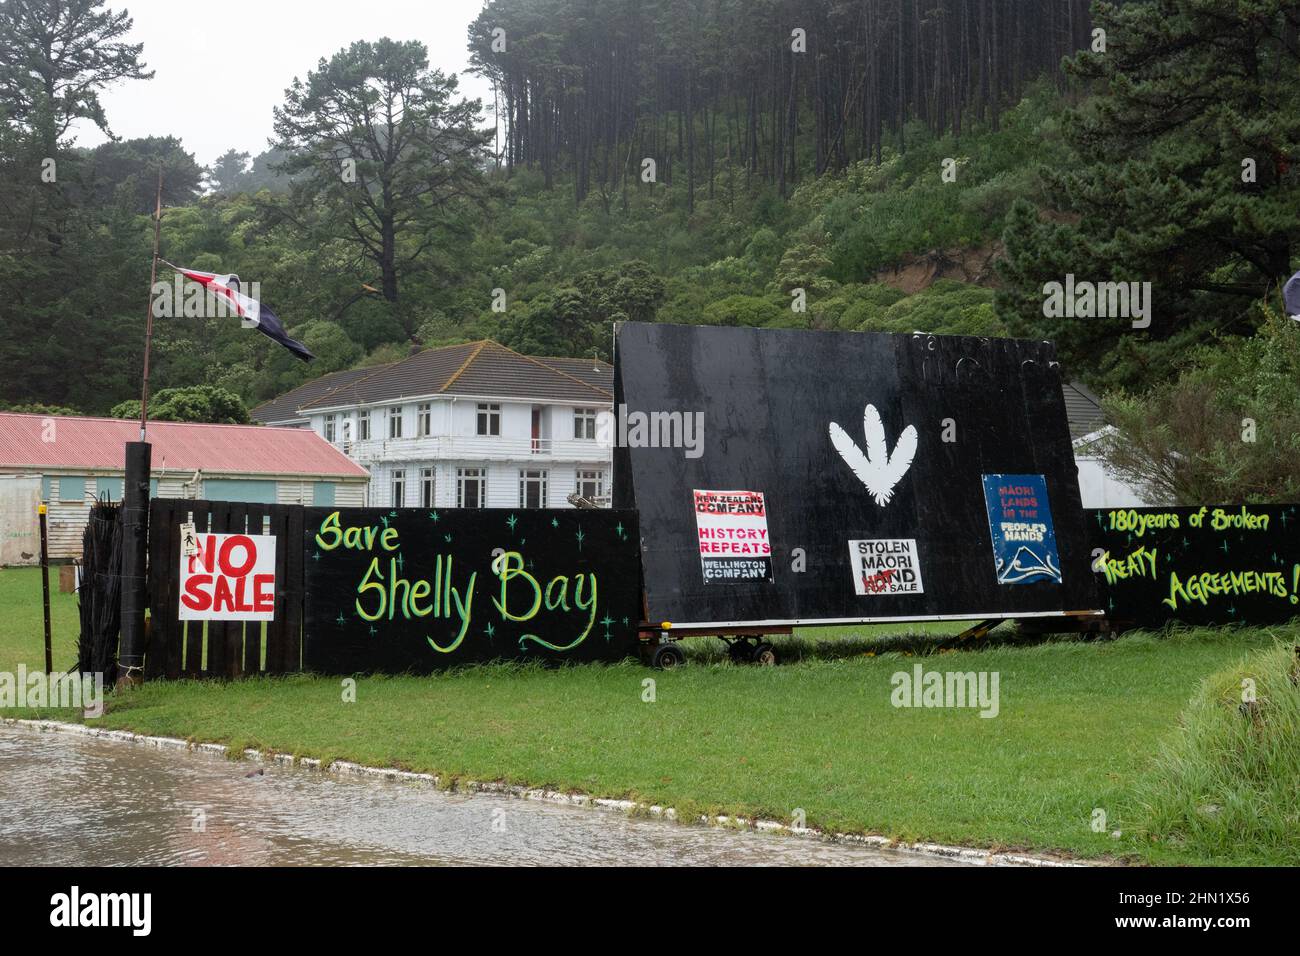 Maori occupy and protest sale of land with disputed ownership at Shelly Bay, Wellington, New Zealand, February 13, 2022 Stock Photo